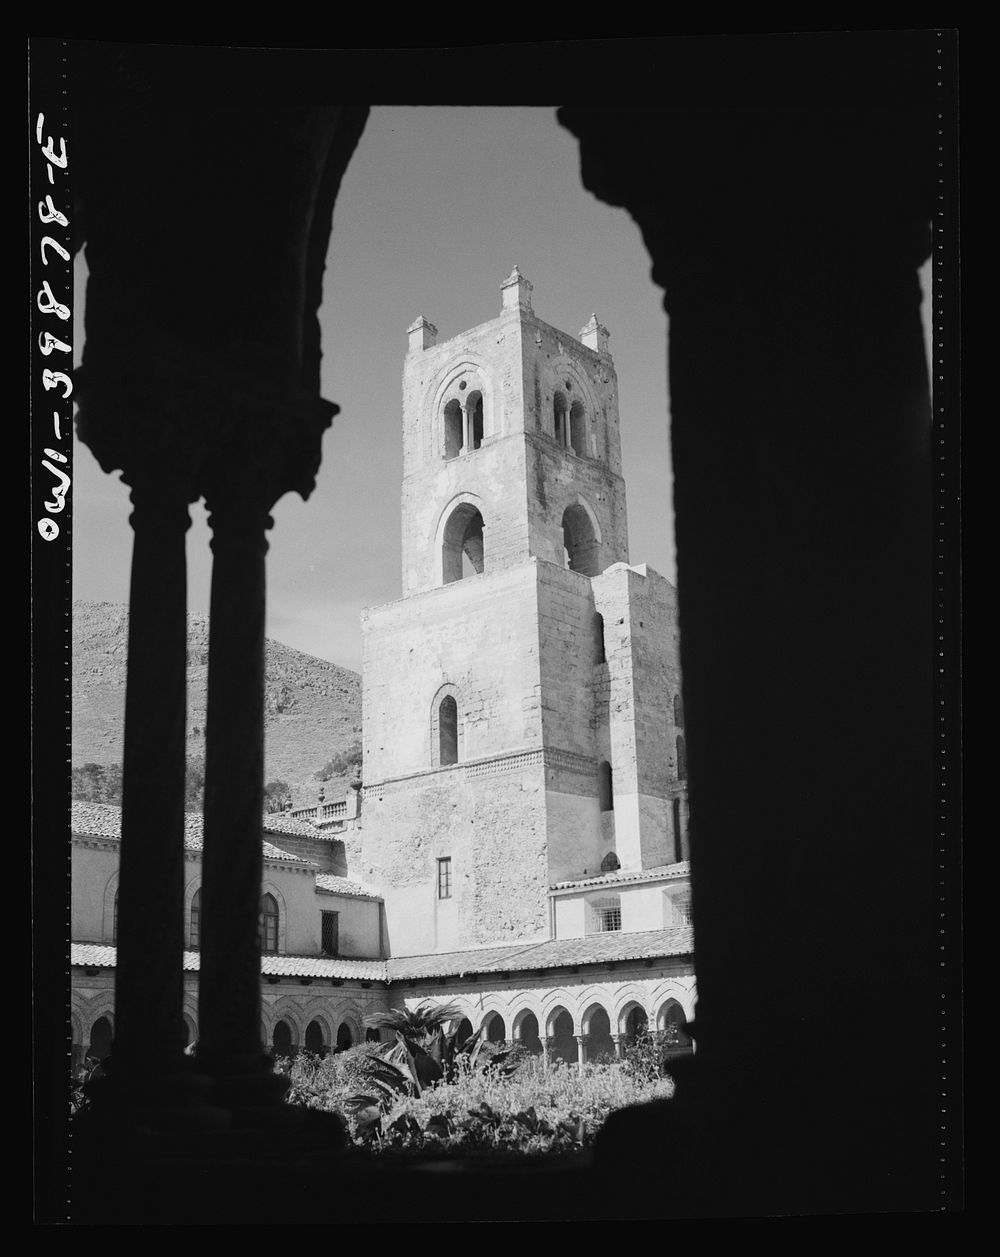 Palermo, Sicily. Monreale Cathedral. Sourced from the Library of Congress.